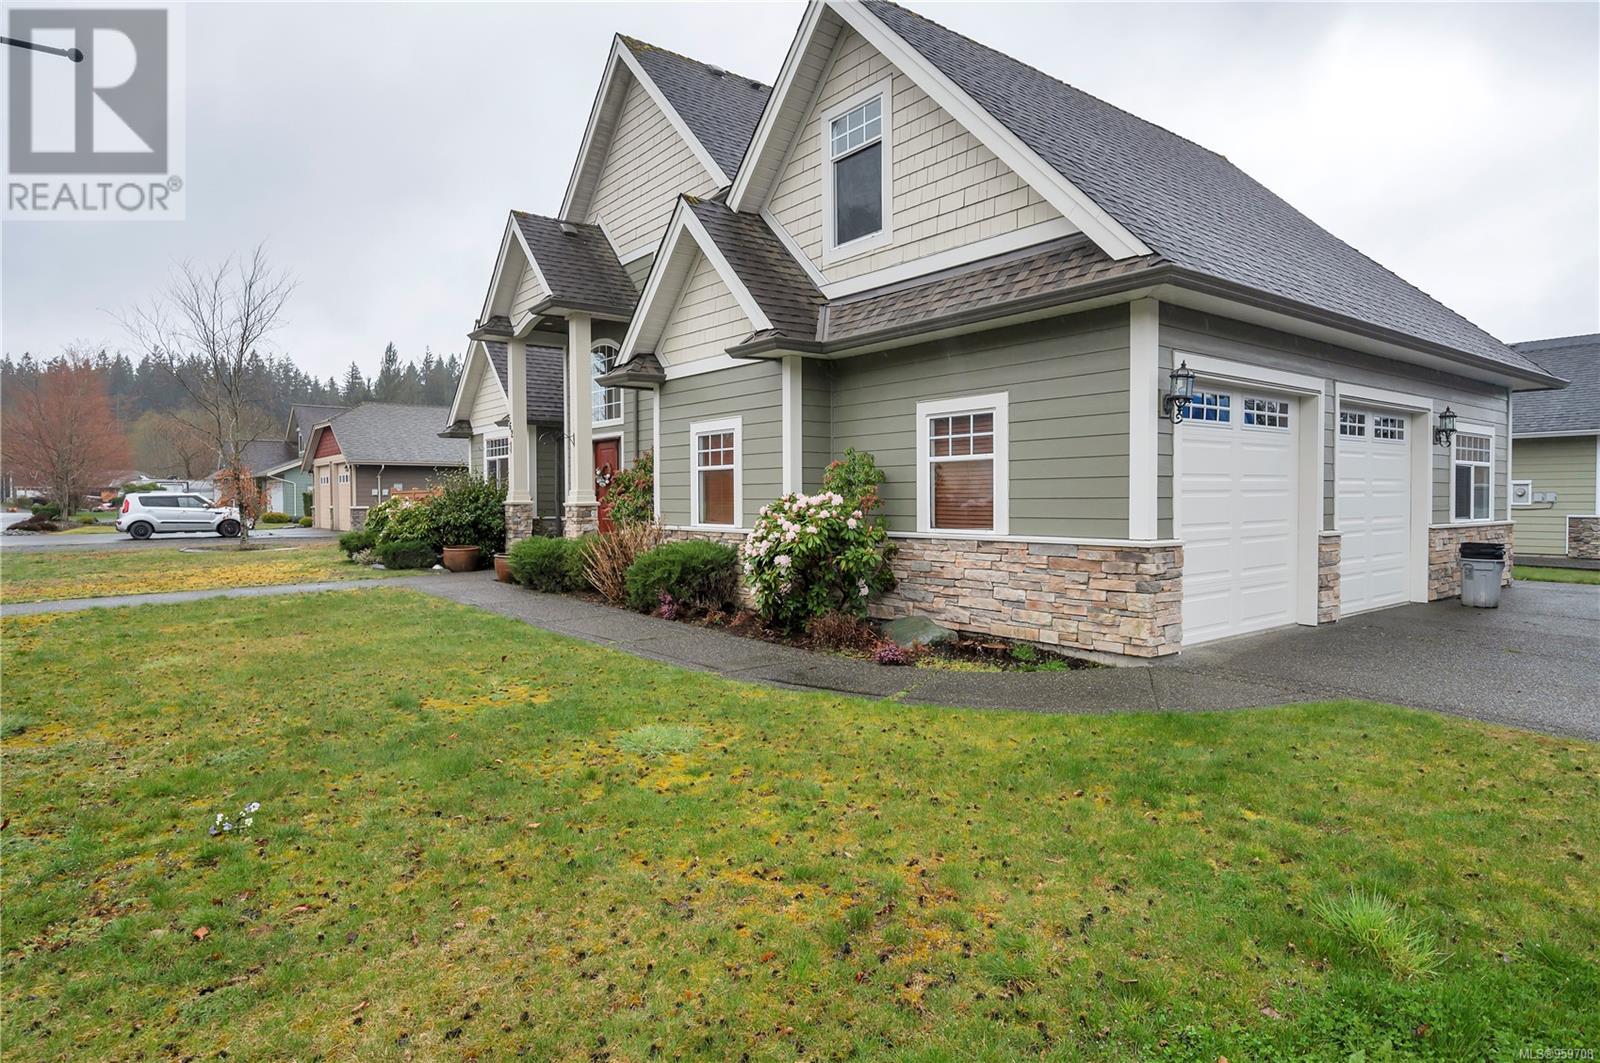 562 Edgewood Dr, Campbell River